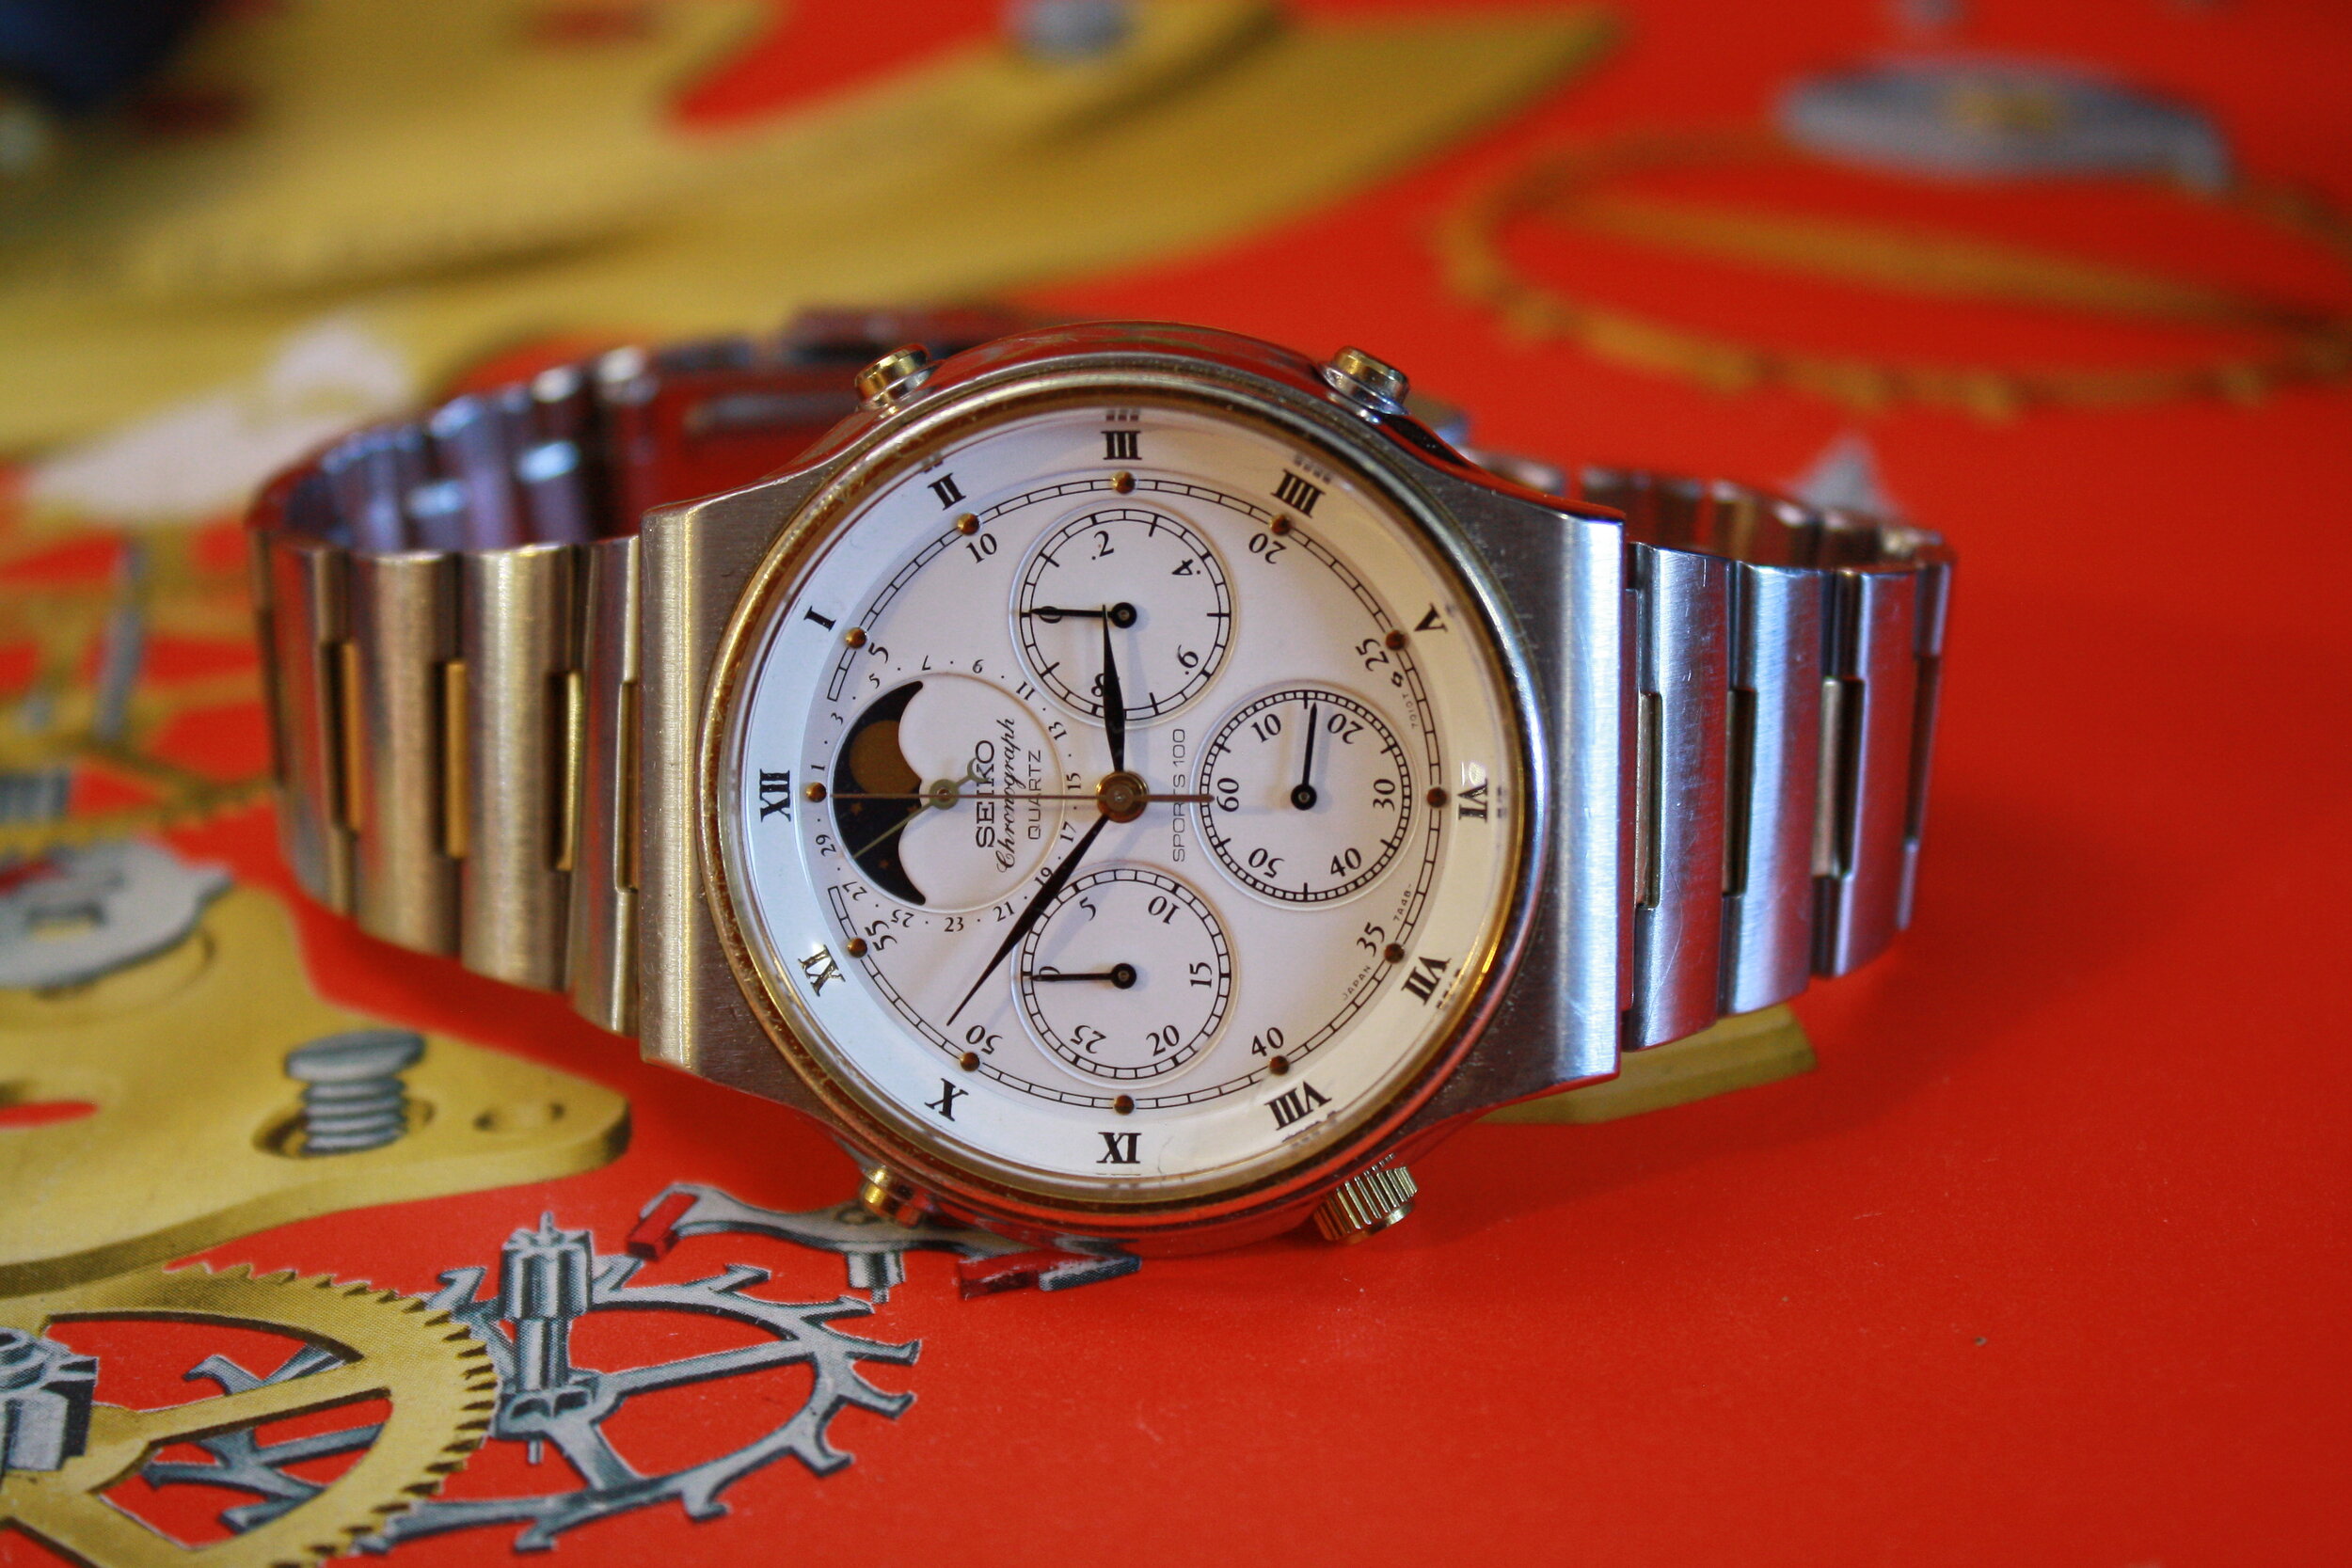 Seiko 7A48-7009 Moonphase Chronograph, All Original, Fully serviced, June  '85 — Klein Vintage Watch